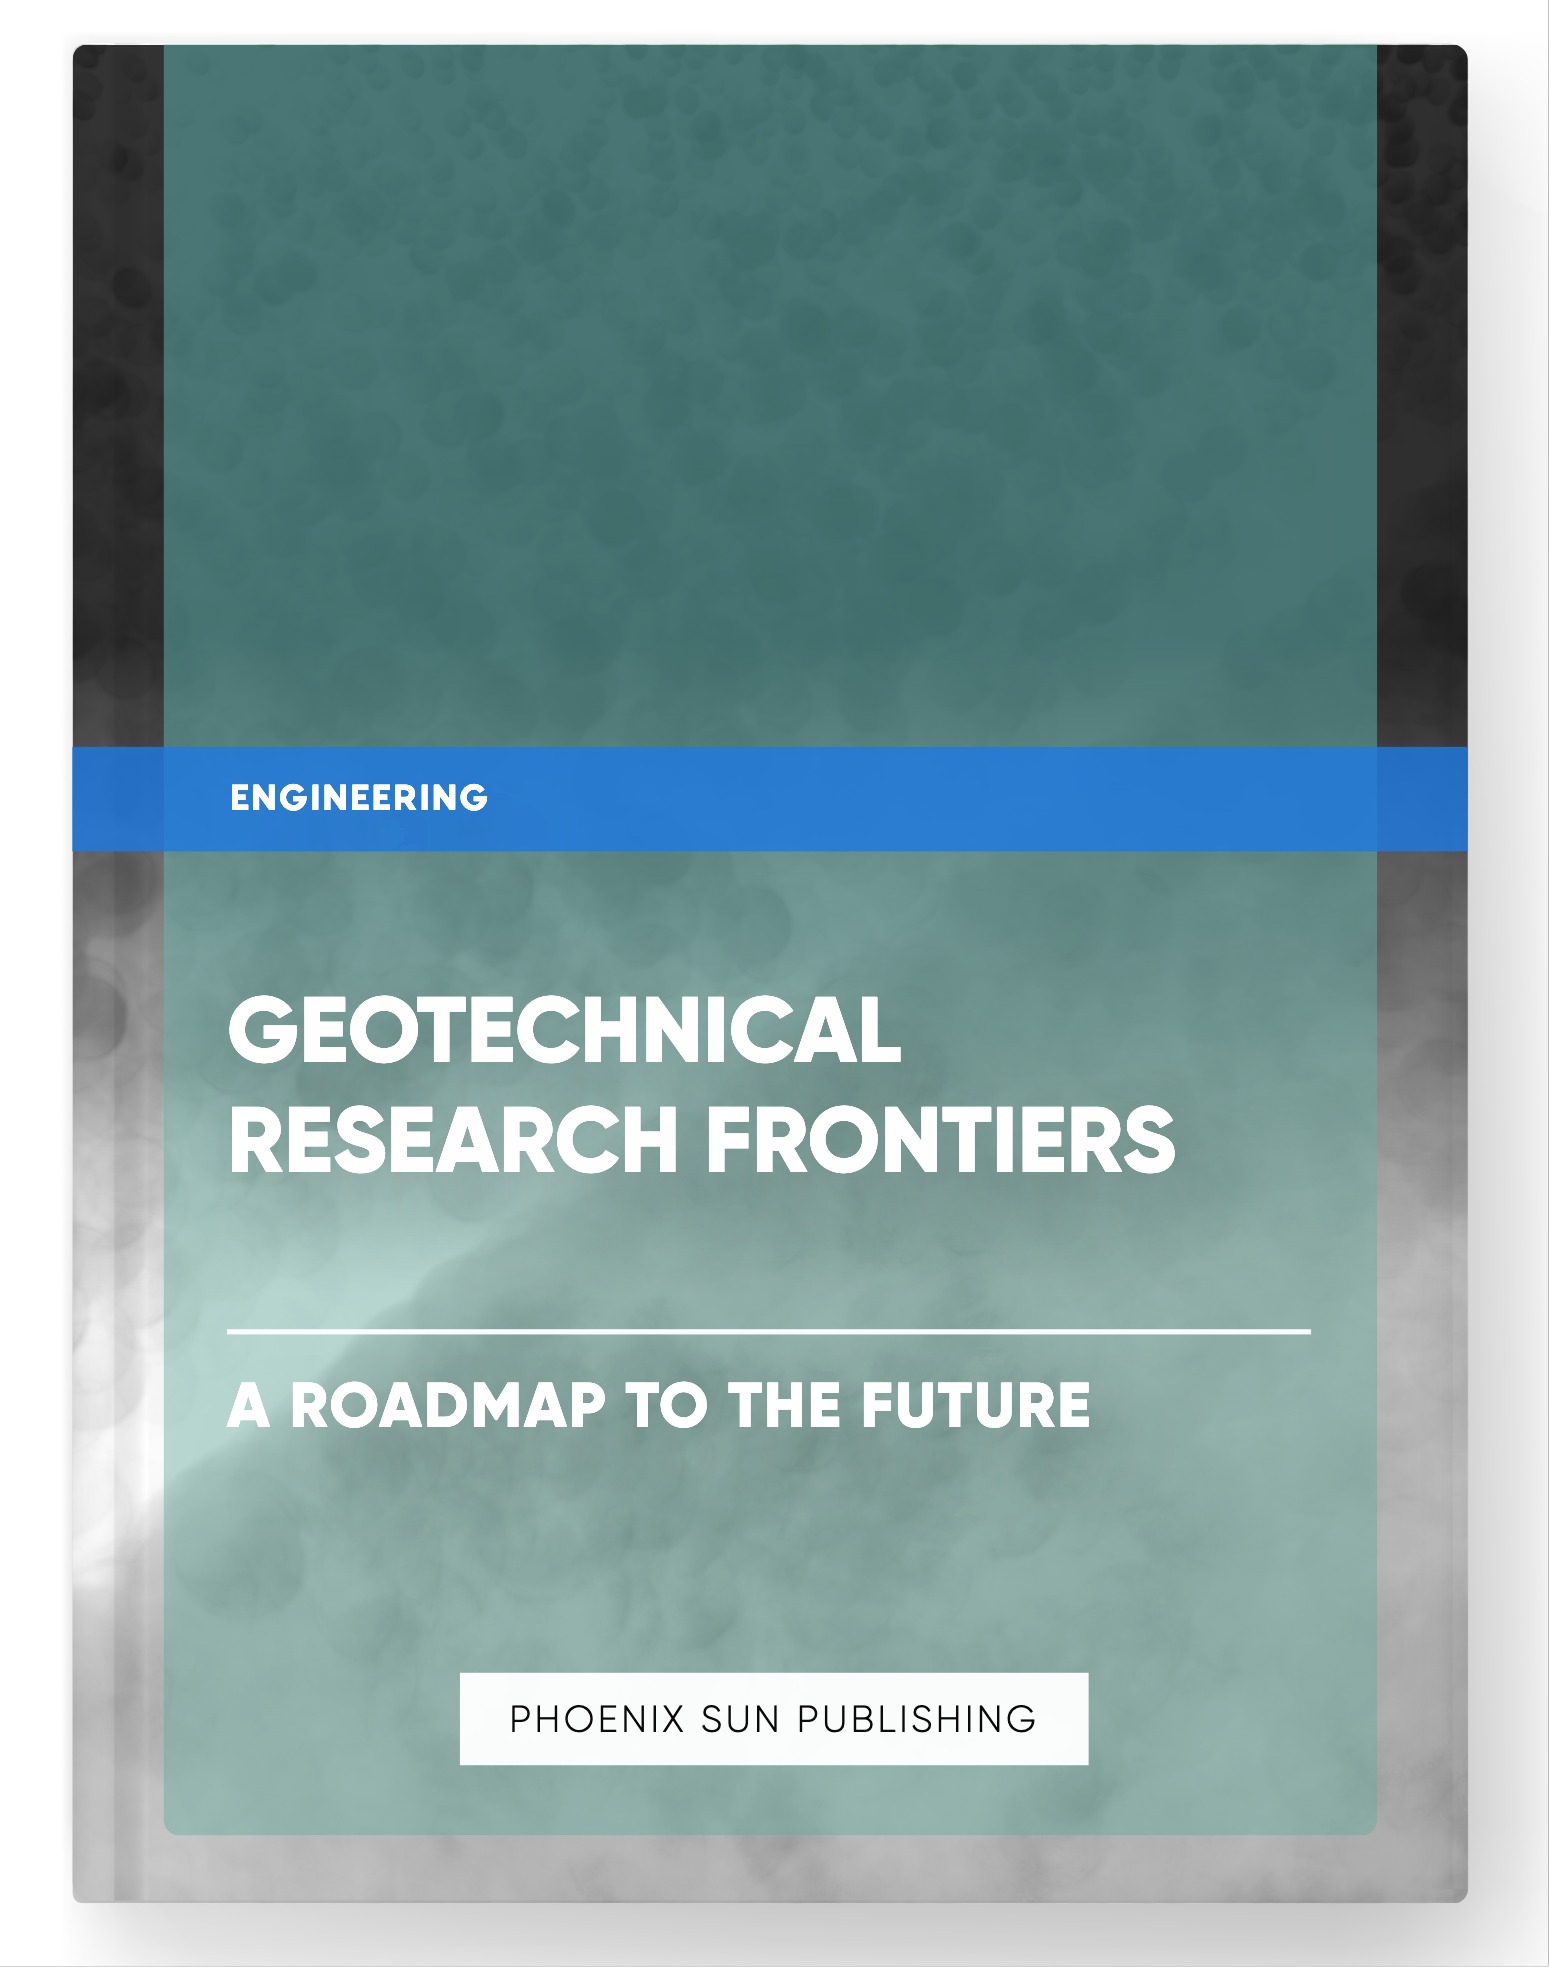 Geotechnical Research Frontiers – A Roadmap to the Future